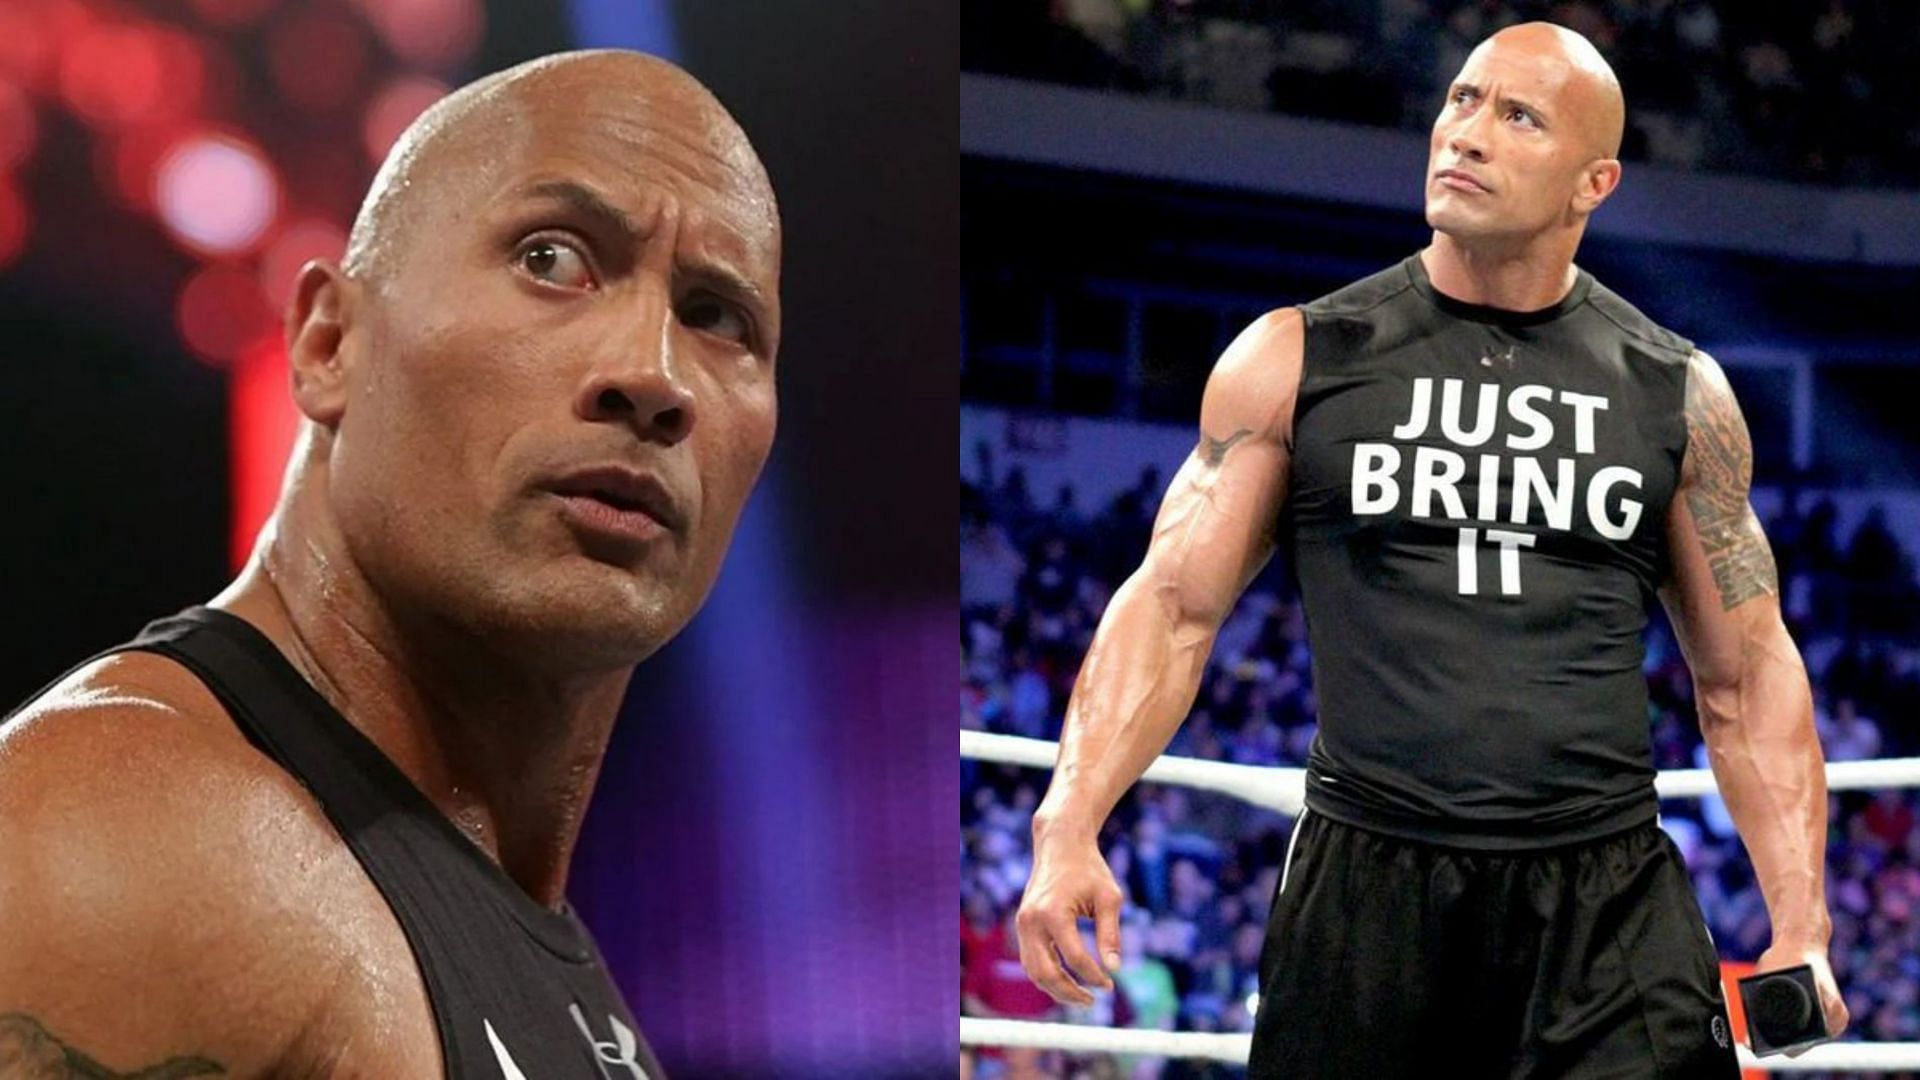 The Rock is now a Hollywood megastar